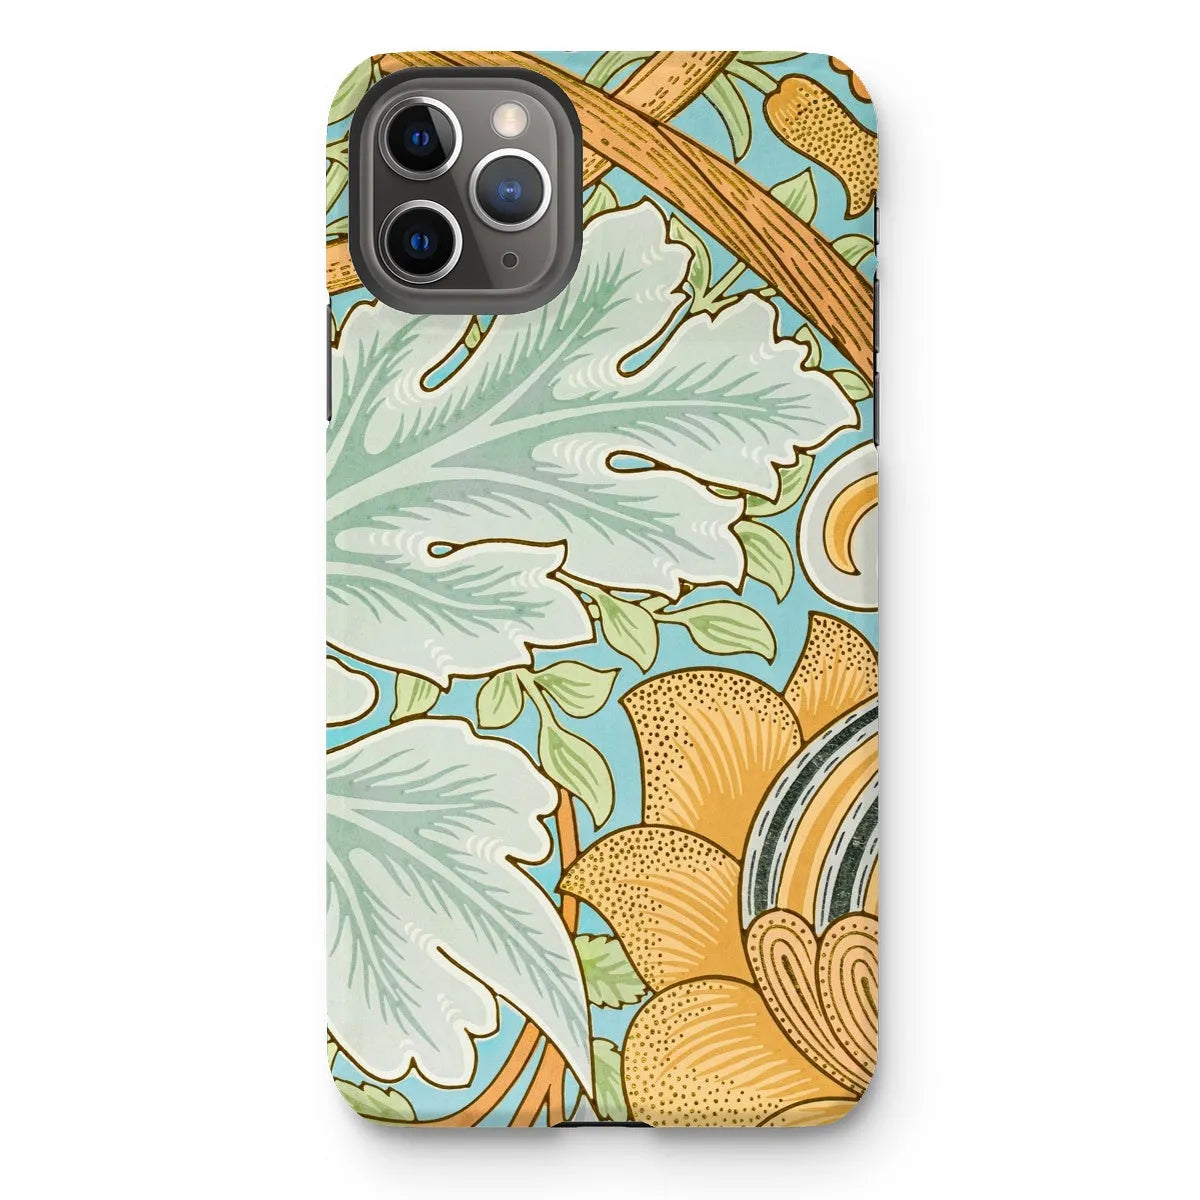 St. James - Arts And Crafts Phone Case - William Morris - Iphone 11 Pro Max / Matte - Mobile Phone Cases - Aesthetic Art